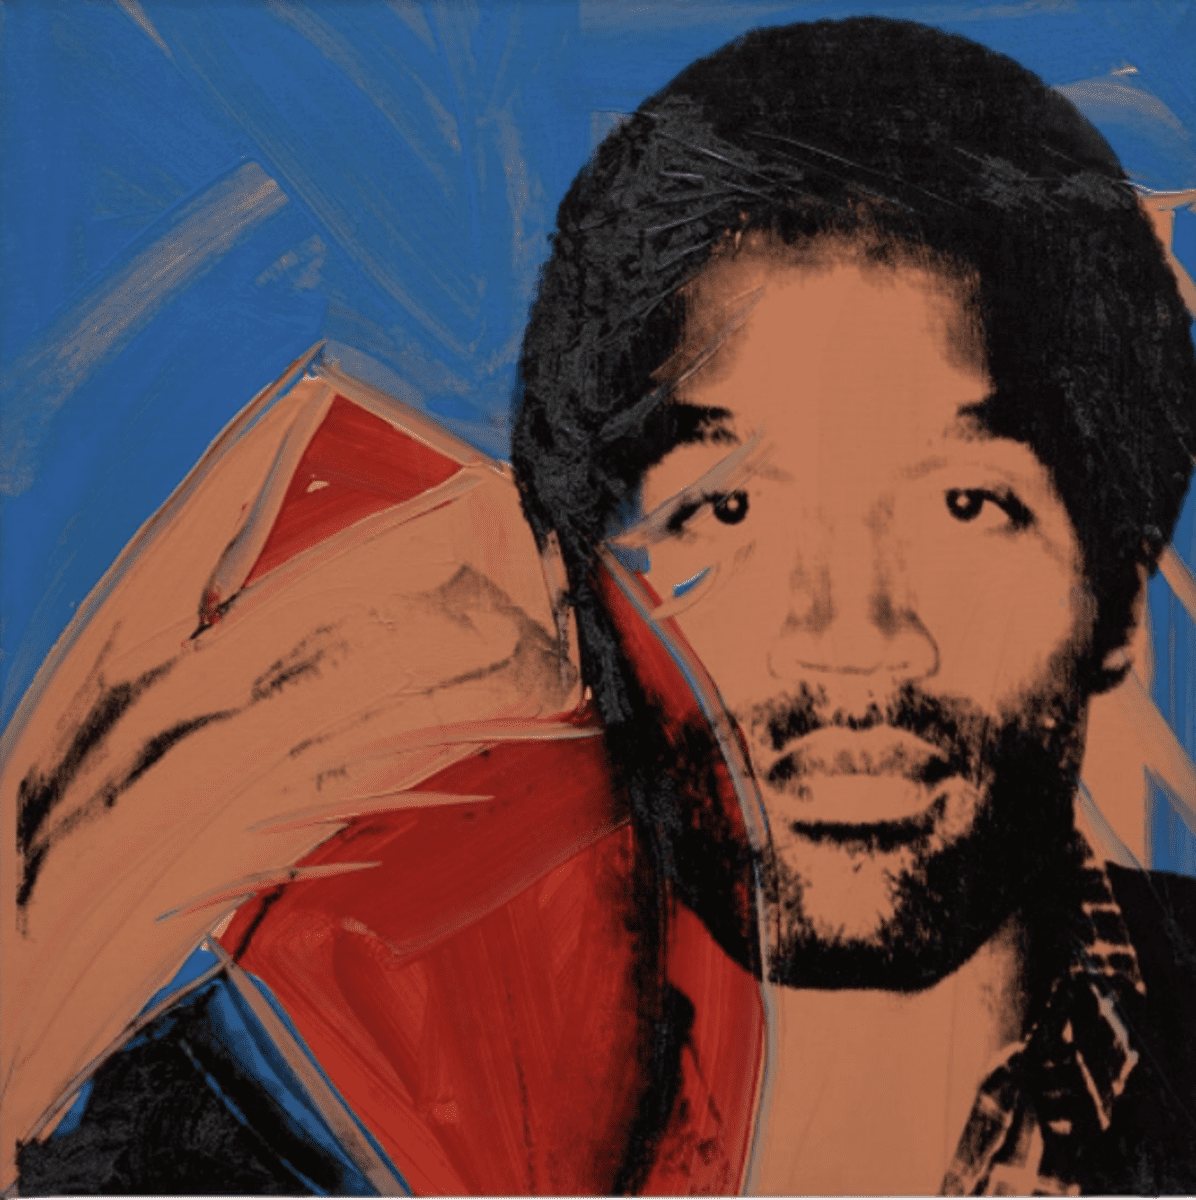 Andy WarholO.J. Simpsonsigned "Andy Warhol" on the reverse; further signed by O.J. Simpson on the reverseacrylic and silkscreen ink on canvas40 x 40 in. (101.6 x 101.6 cm)Executed in 1977.Estimate$300,000 - 500,000 Courtesy Phillips